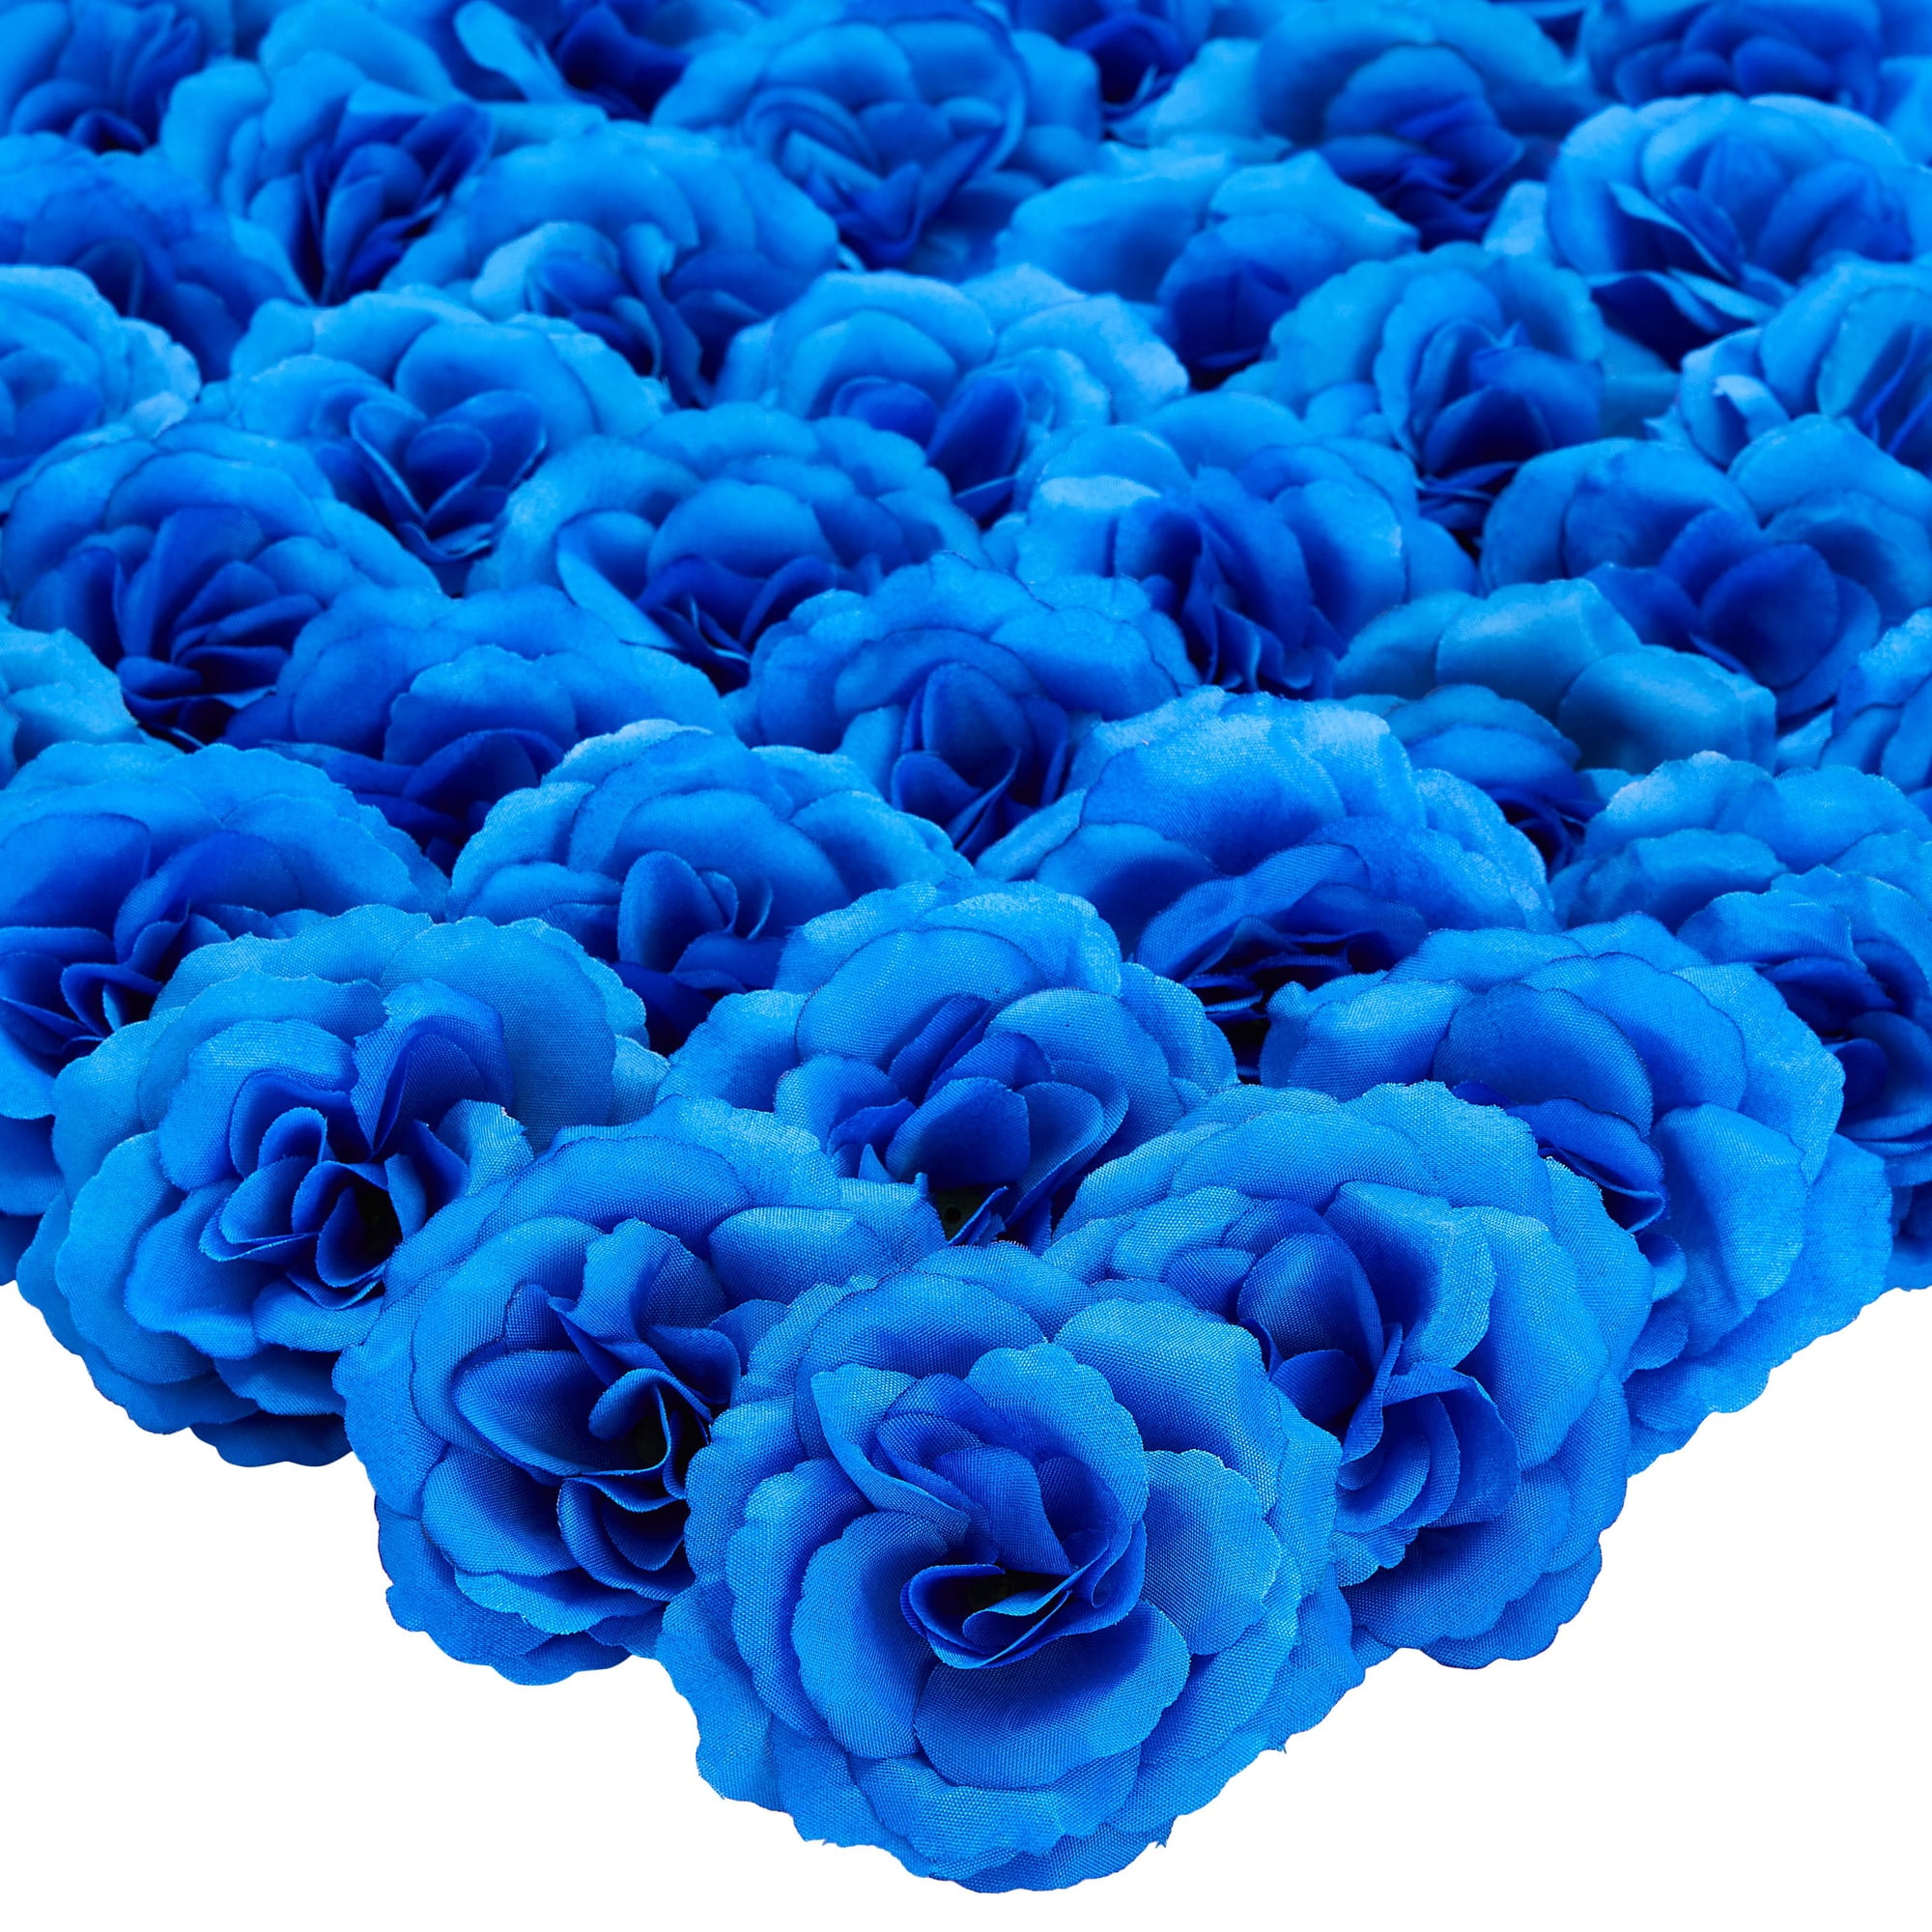 royal blue and pink wedding decorations